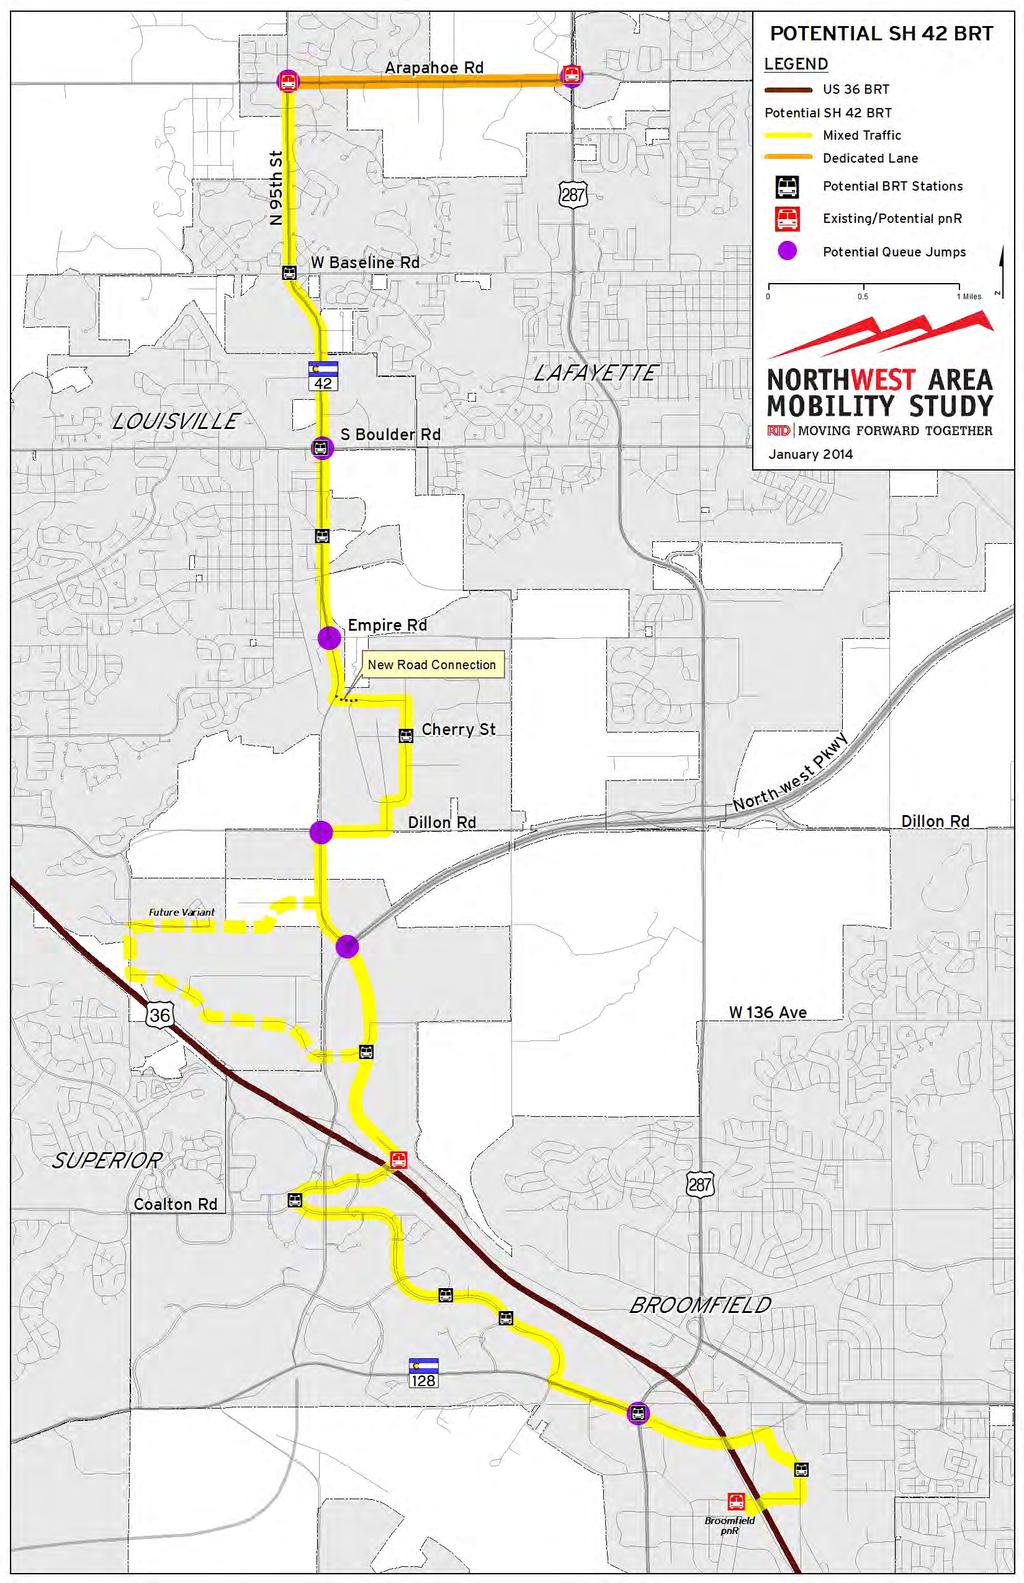 SH 42 BRT AT A GLANCE Starts/Ends: US 287/Arapahoe Road to US 36 / Broomfield Park-n-Ride Length: 13 miles (11% in dedicated lanes) 2035 Travel Time (Start to End): 38 minutes (1 minute